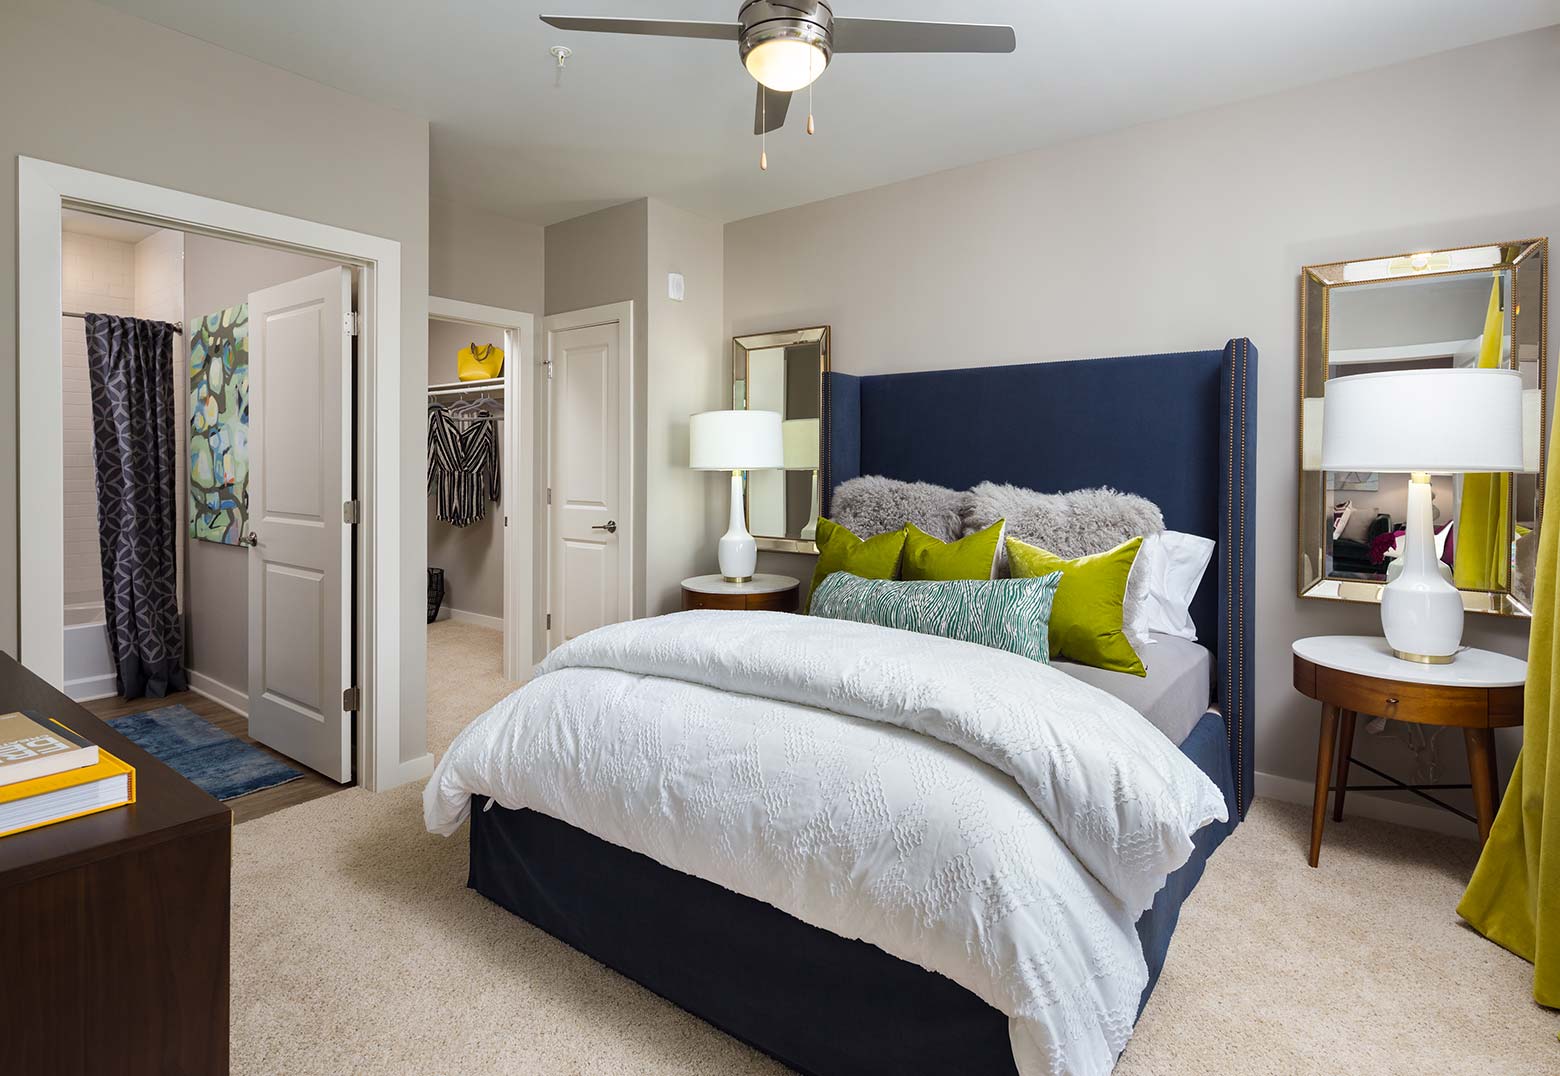 A stylish bedroom adorned with two elegant lamps, two sleek mirrors, and a large ceiling fan.